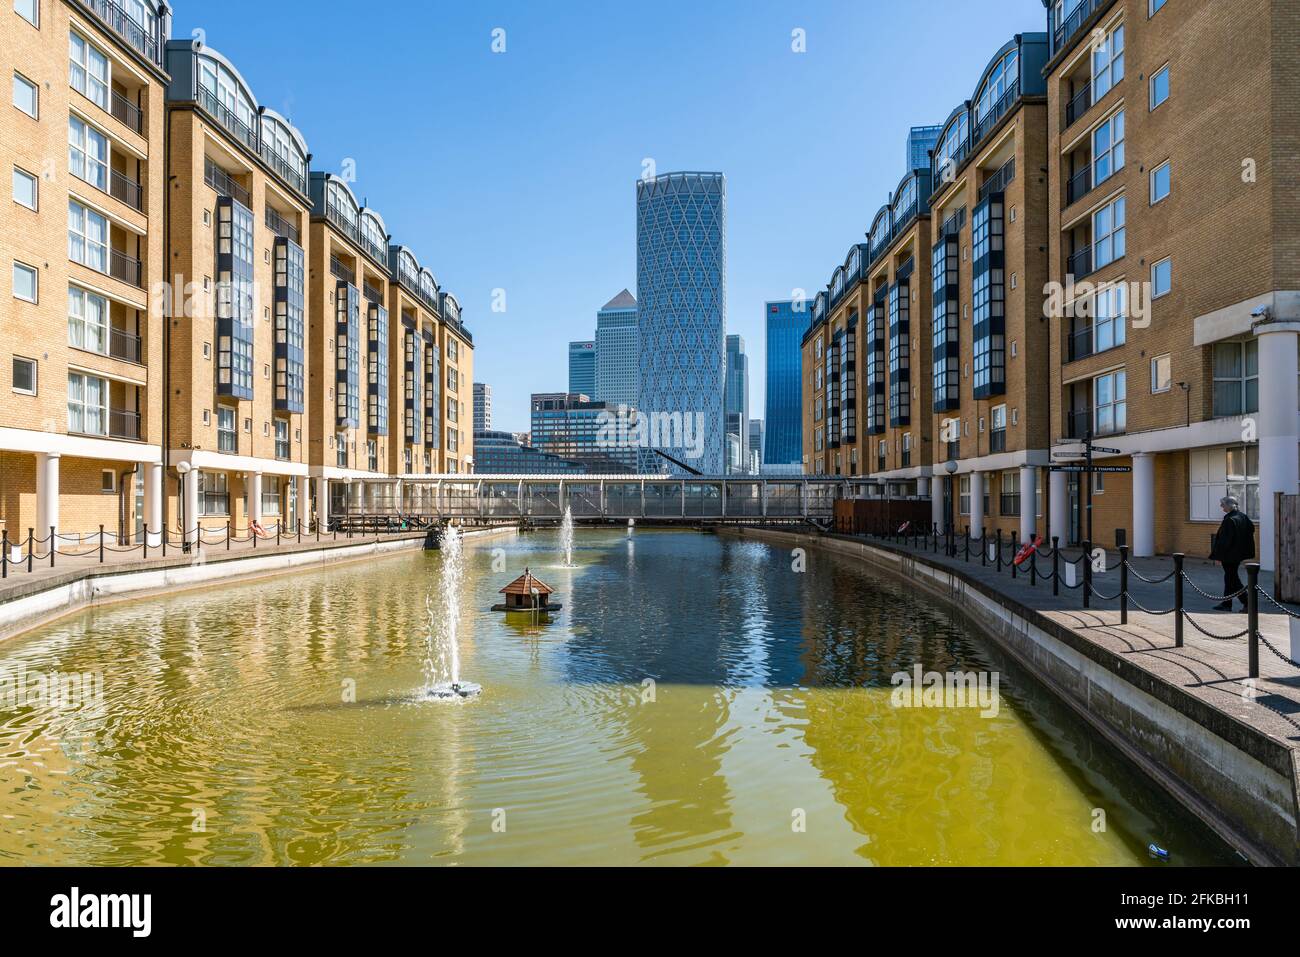 LONDON, UK - APRIL 23, 2021: Modern skyscrapers of Canary Wharf, the financial hub in London seen across the Old Nelson Dock Stock Photo